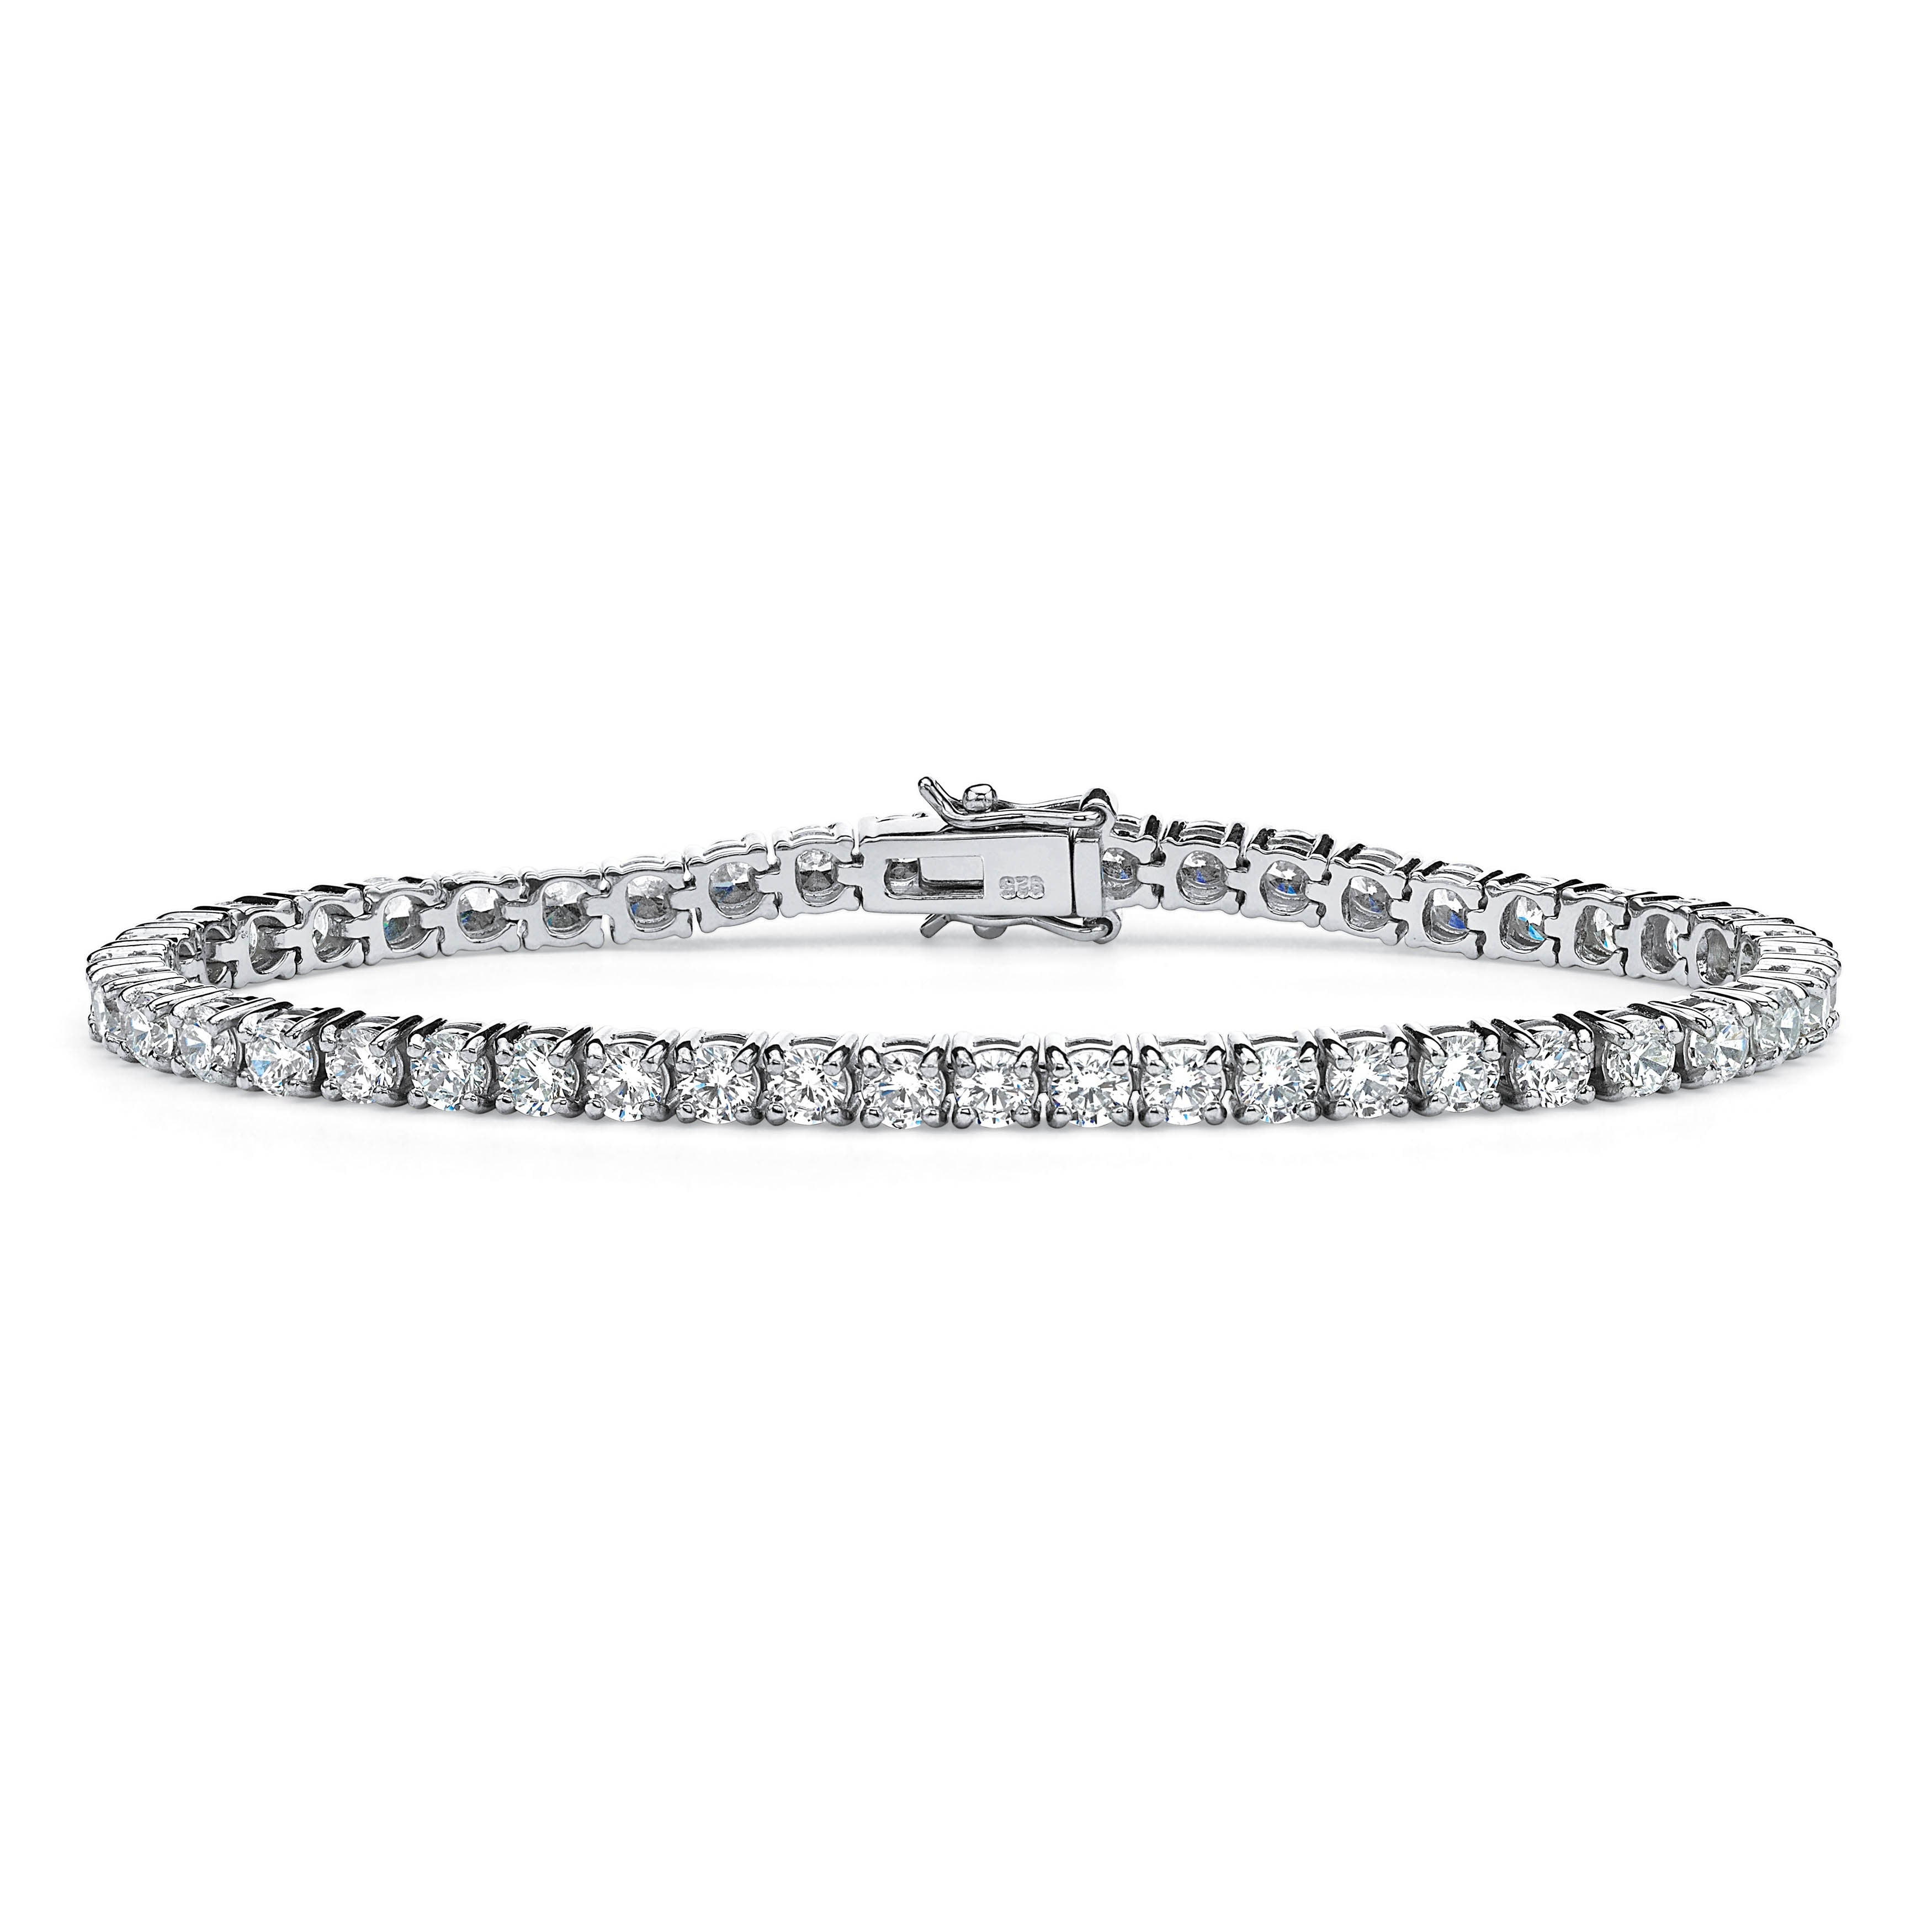 6.90 TCW Round Cubic Zirconia Platinum over Sterling Silver Tennis Bracelet 7 1/2" Classic